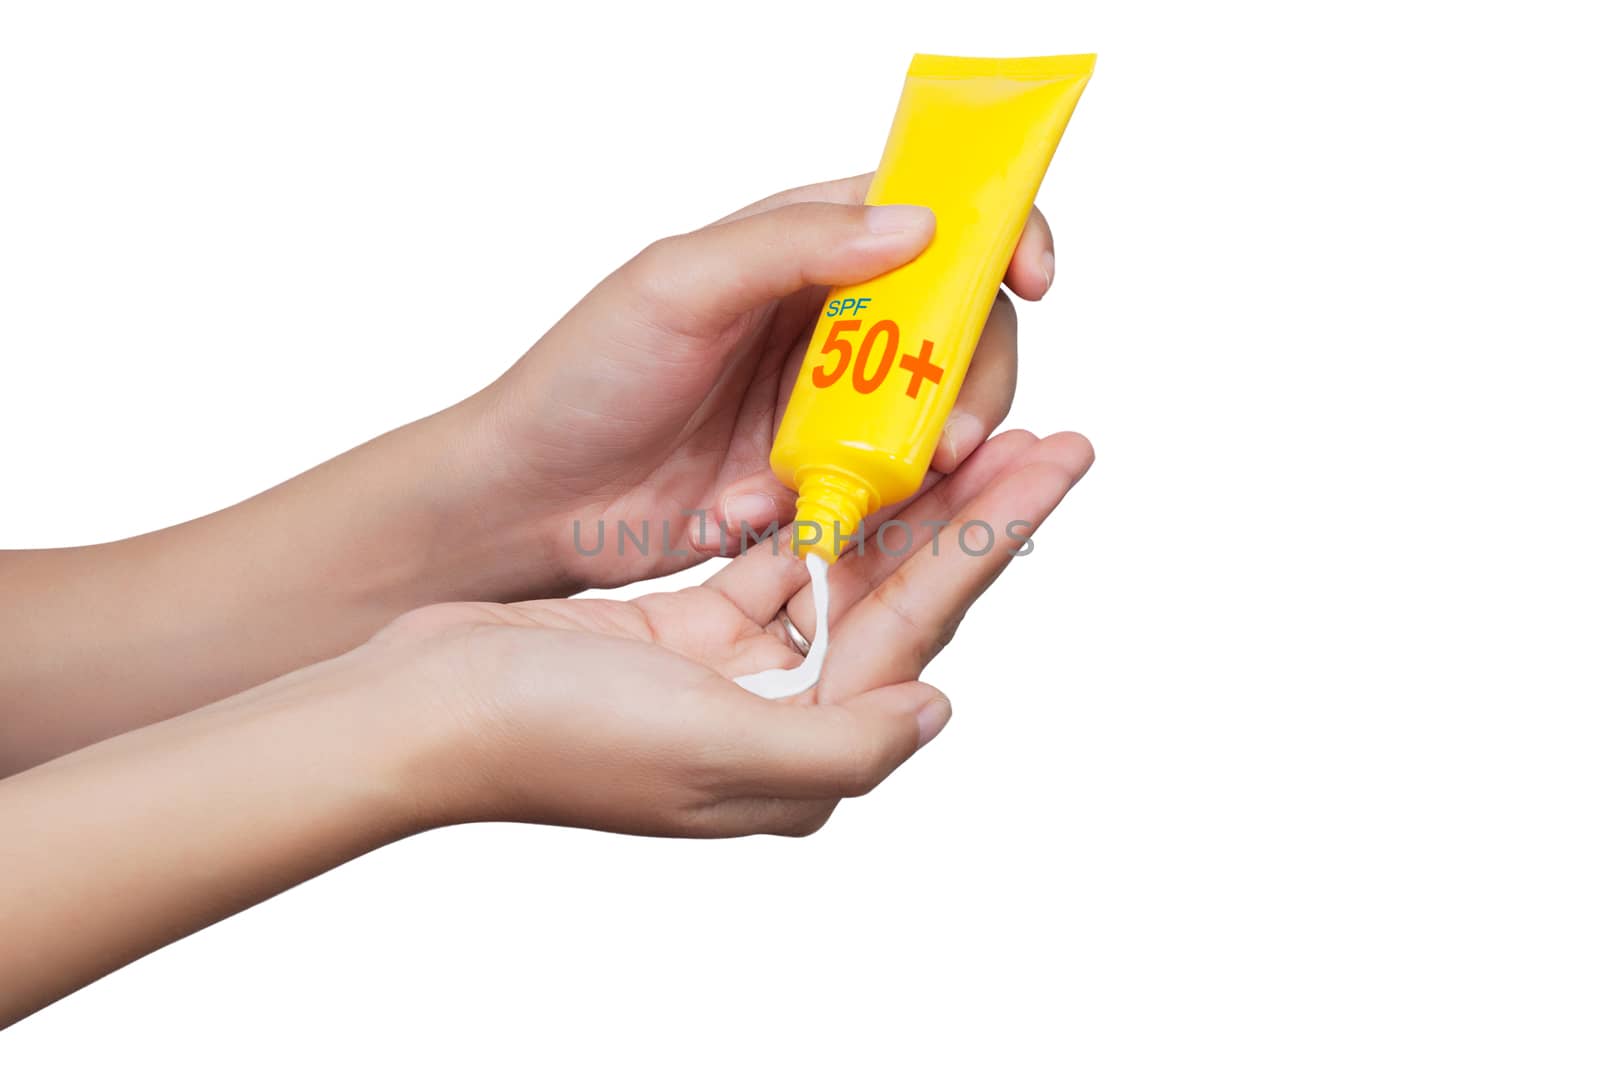 woman applying sunscreen on her hand isolated on white background with clipping path. SPF sunblock protection concept. Travel vacation